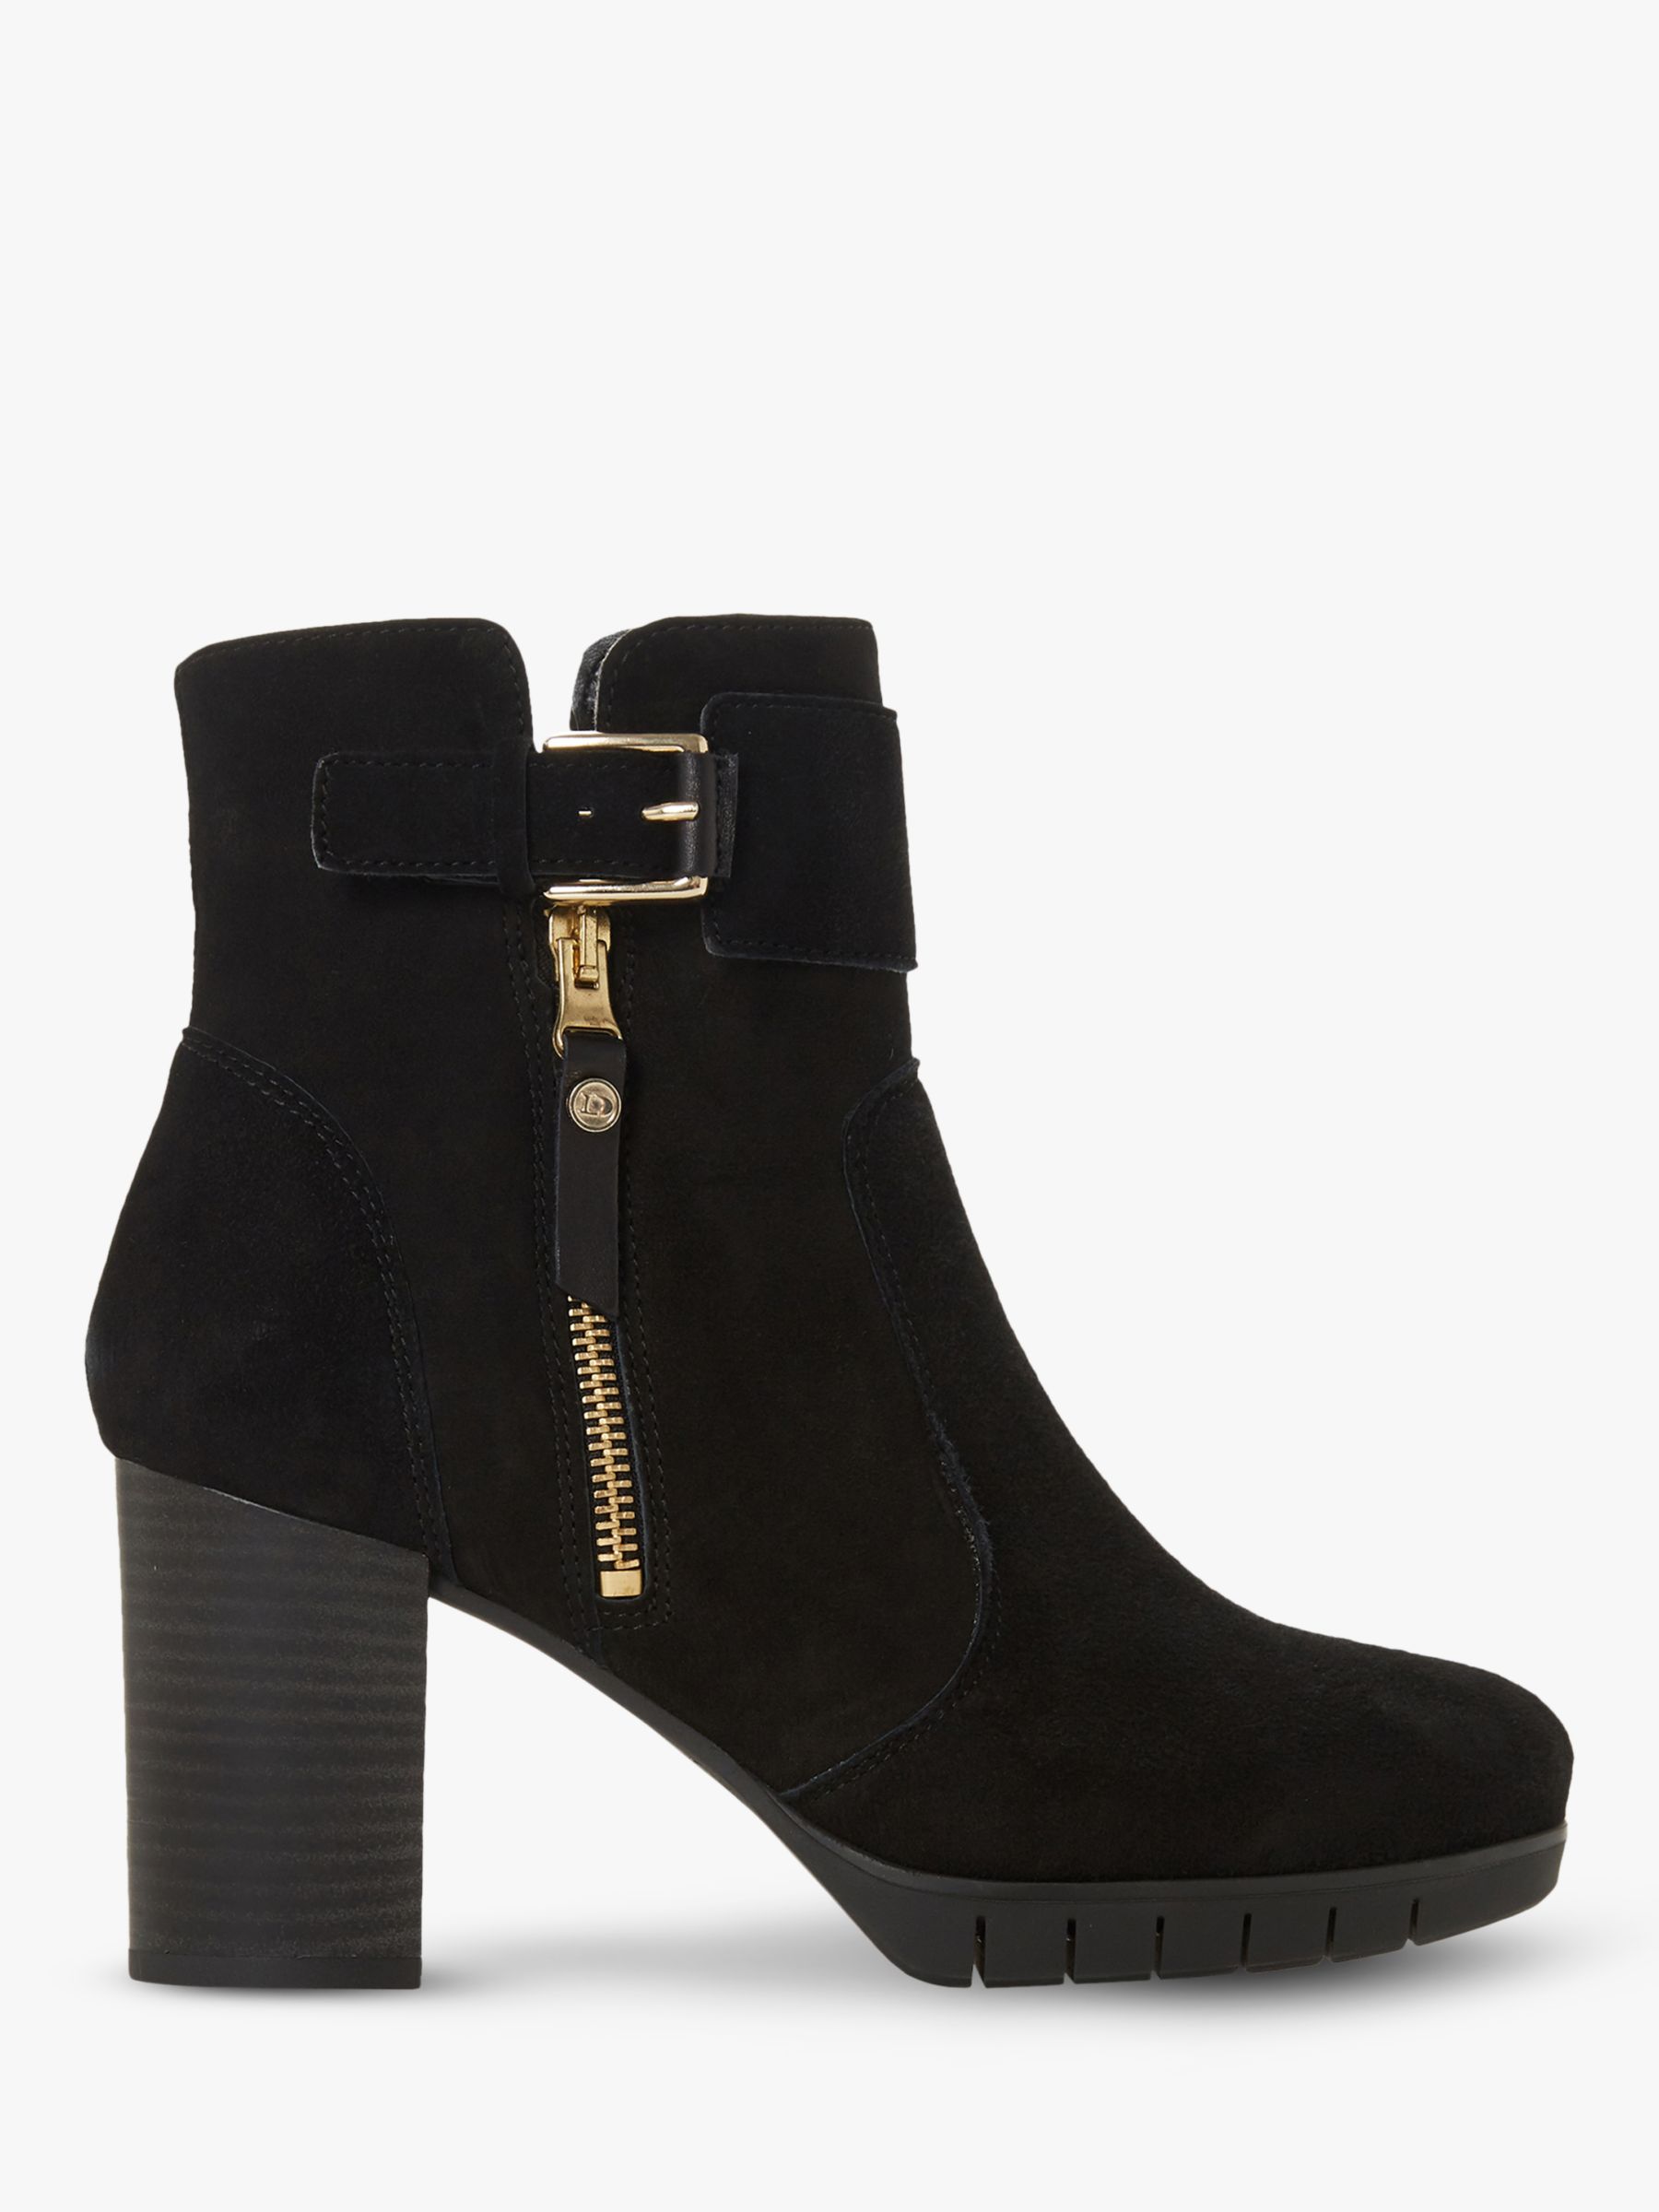 Dune Ossian Suede Zip Ankle Boots